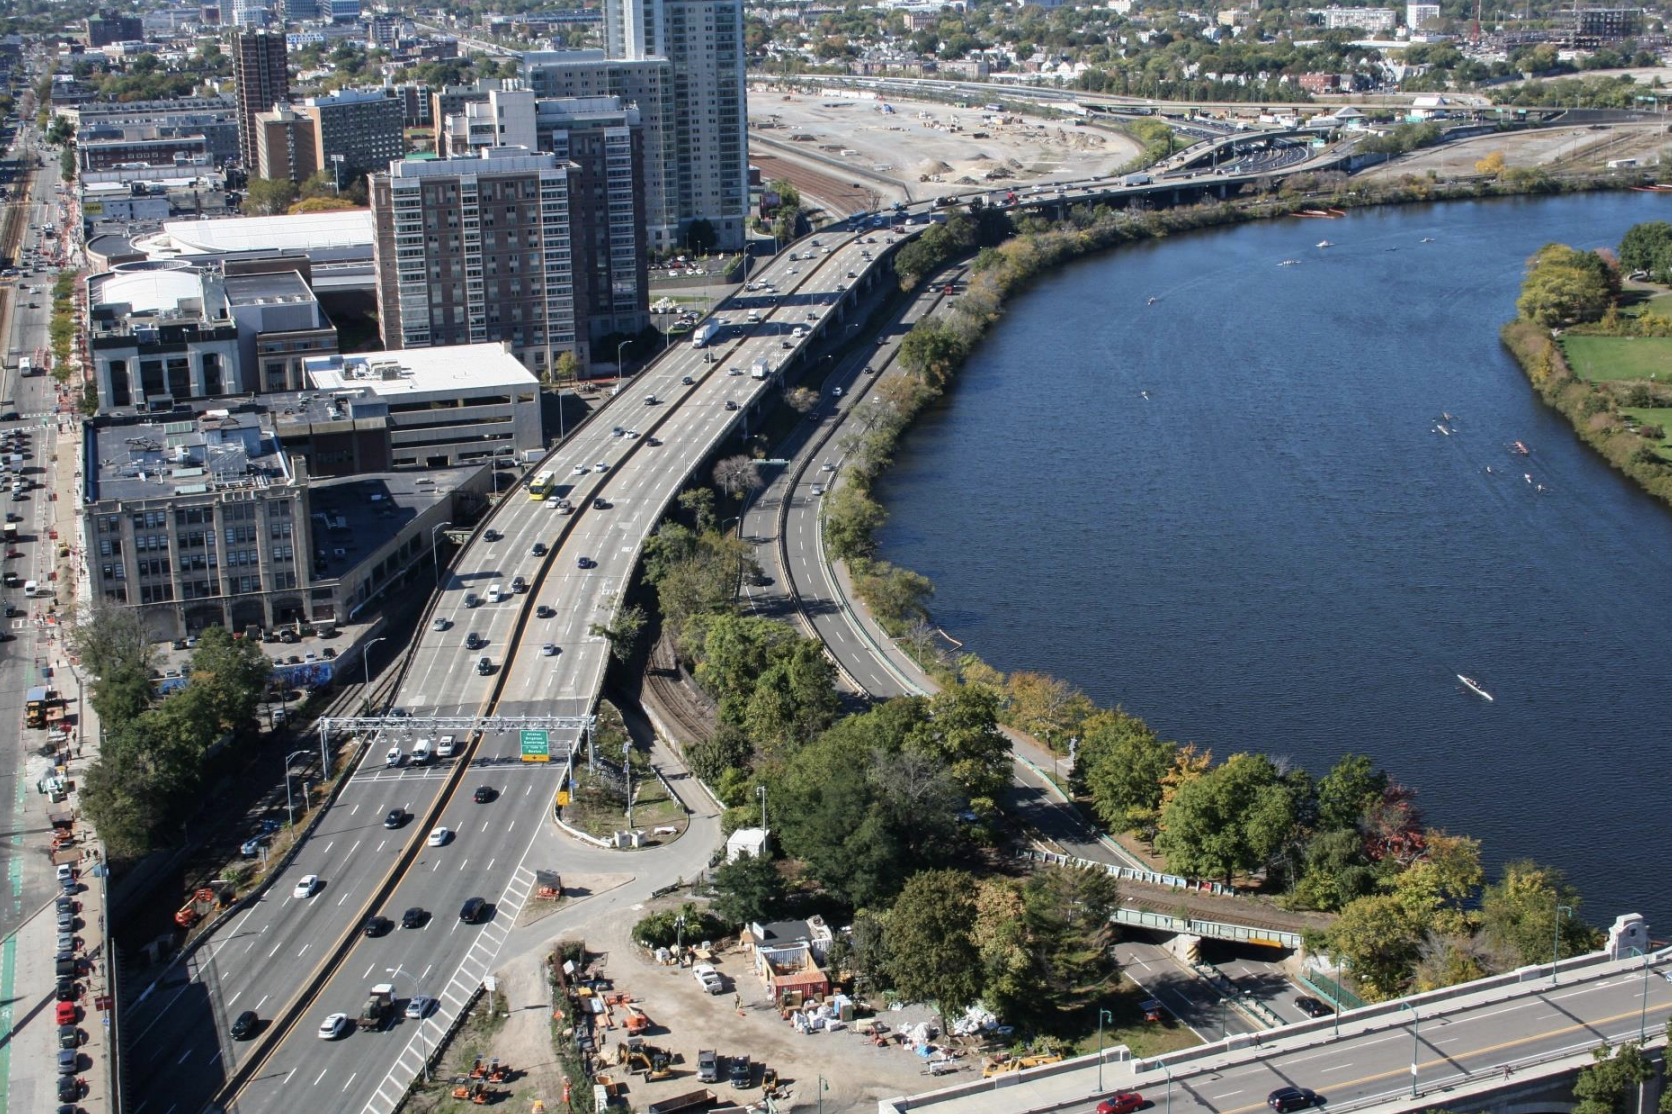 An aerial view of the "throat" section of Interstate 90 near Boston University, looking west toward the vacant former railyards where Harvard University aims to develop a new urban neighborhood of housing, office and lab space. Courtesy of MassDOT.